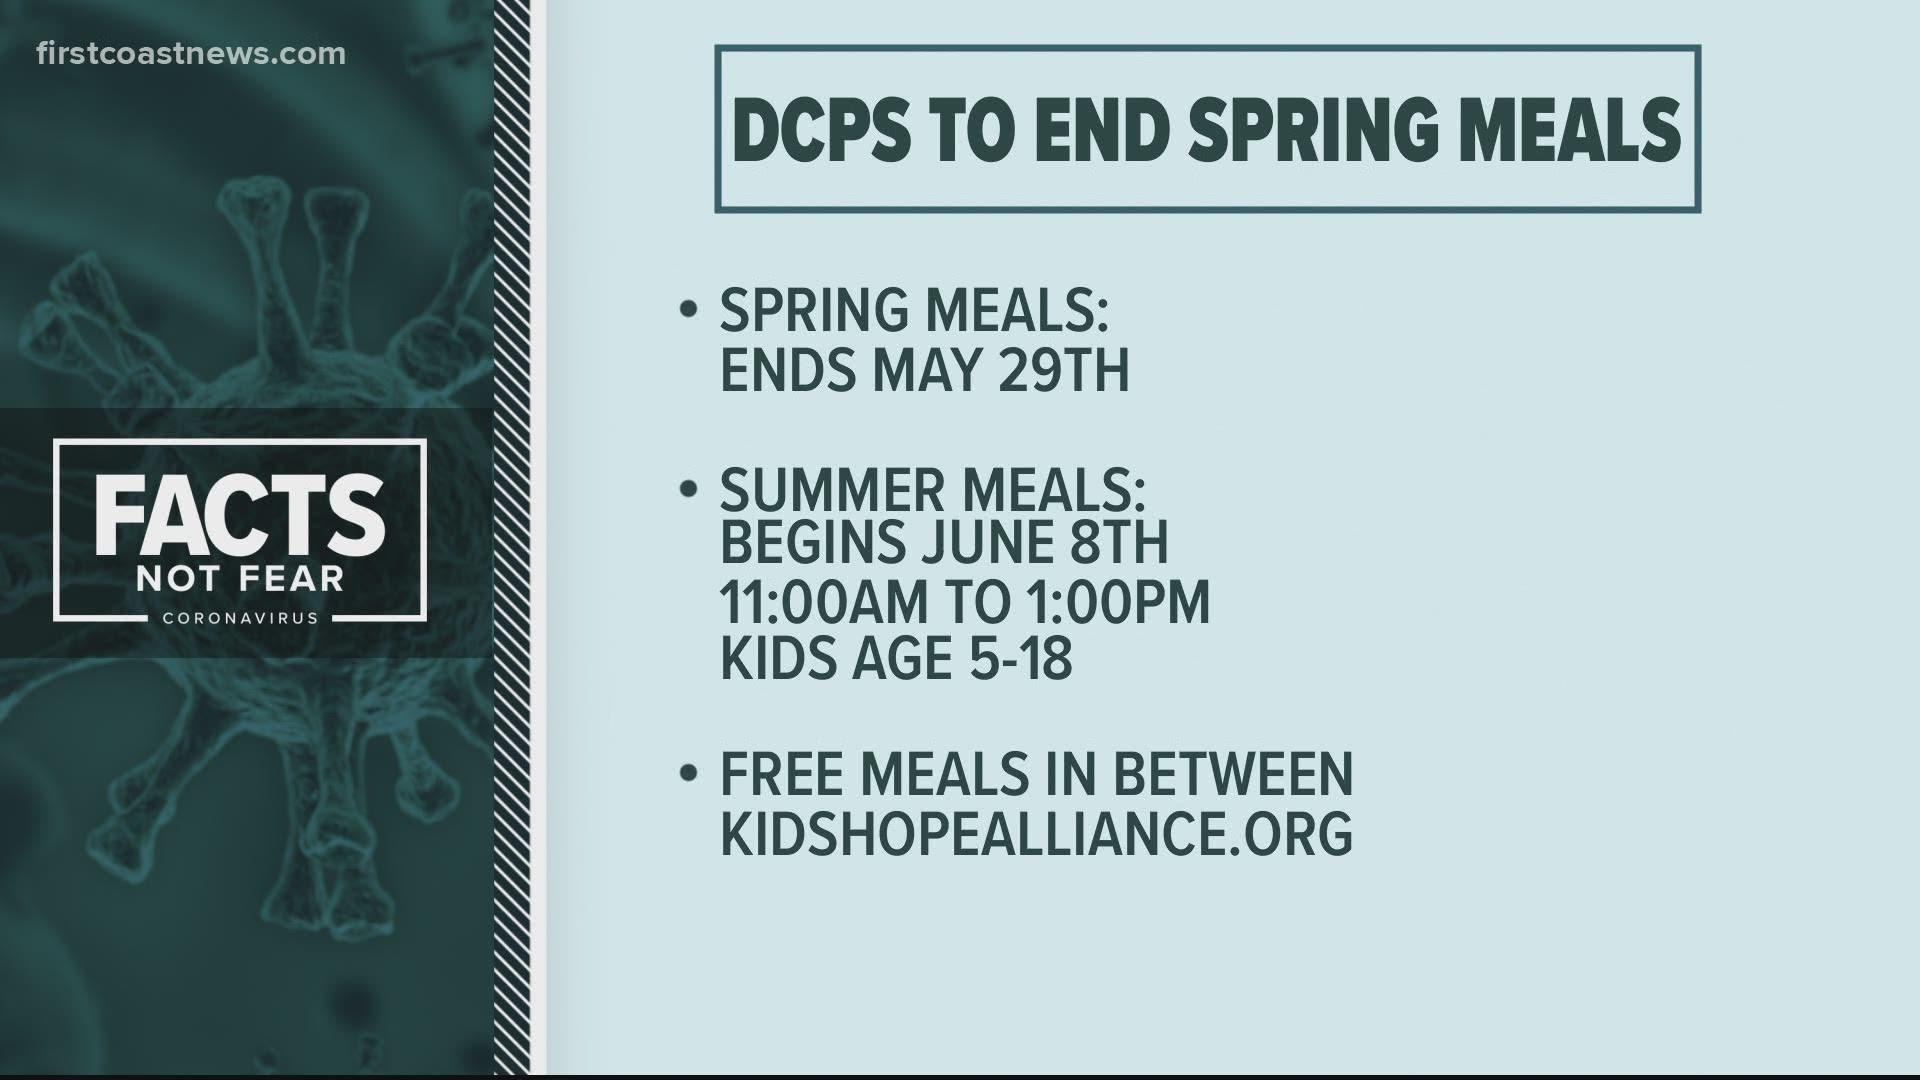 DCPS posted the update to its Facebook page, saying no enrollment is required for its summer meals program.